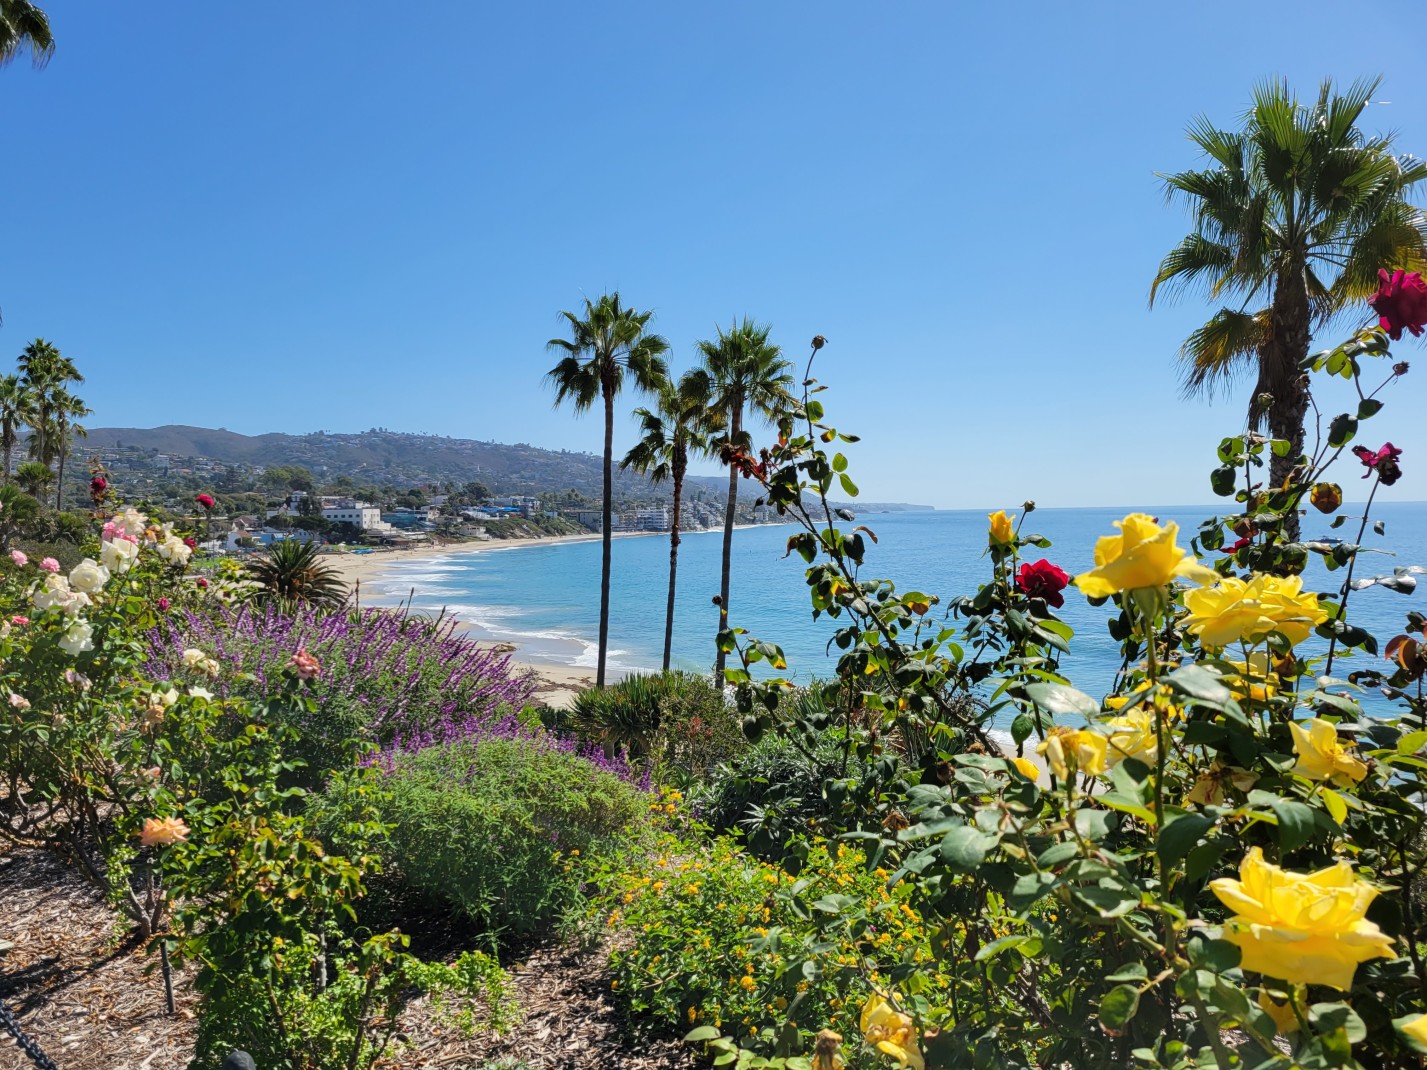 Green plants and yellow flowers in foreground with blue ocean and golden sand in distance